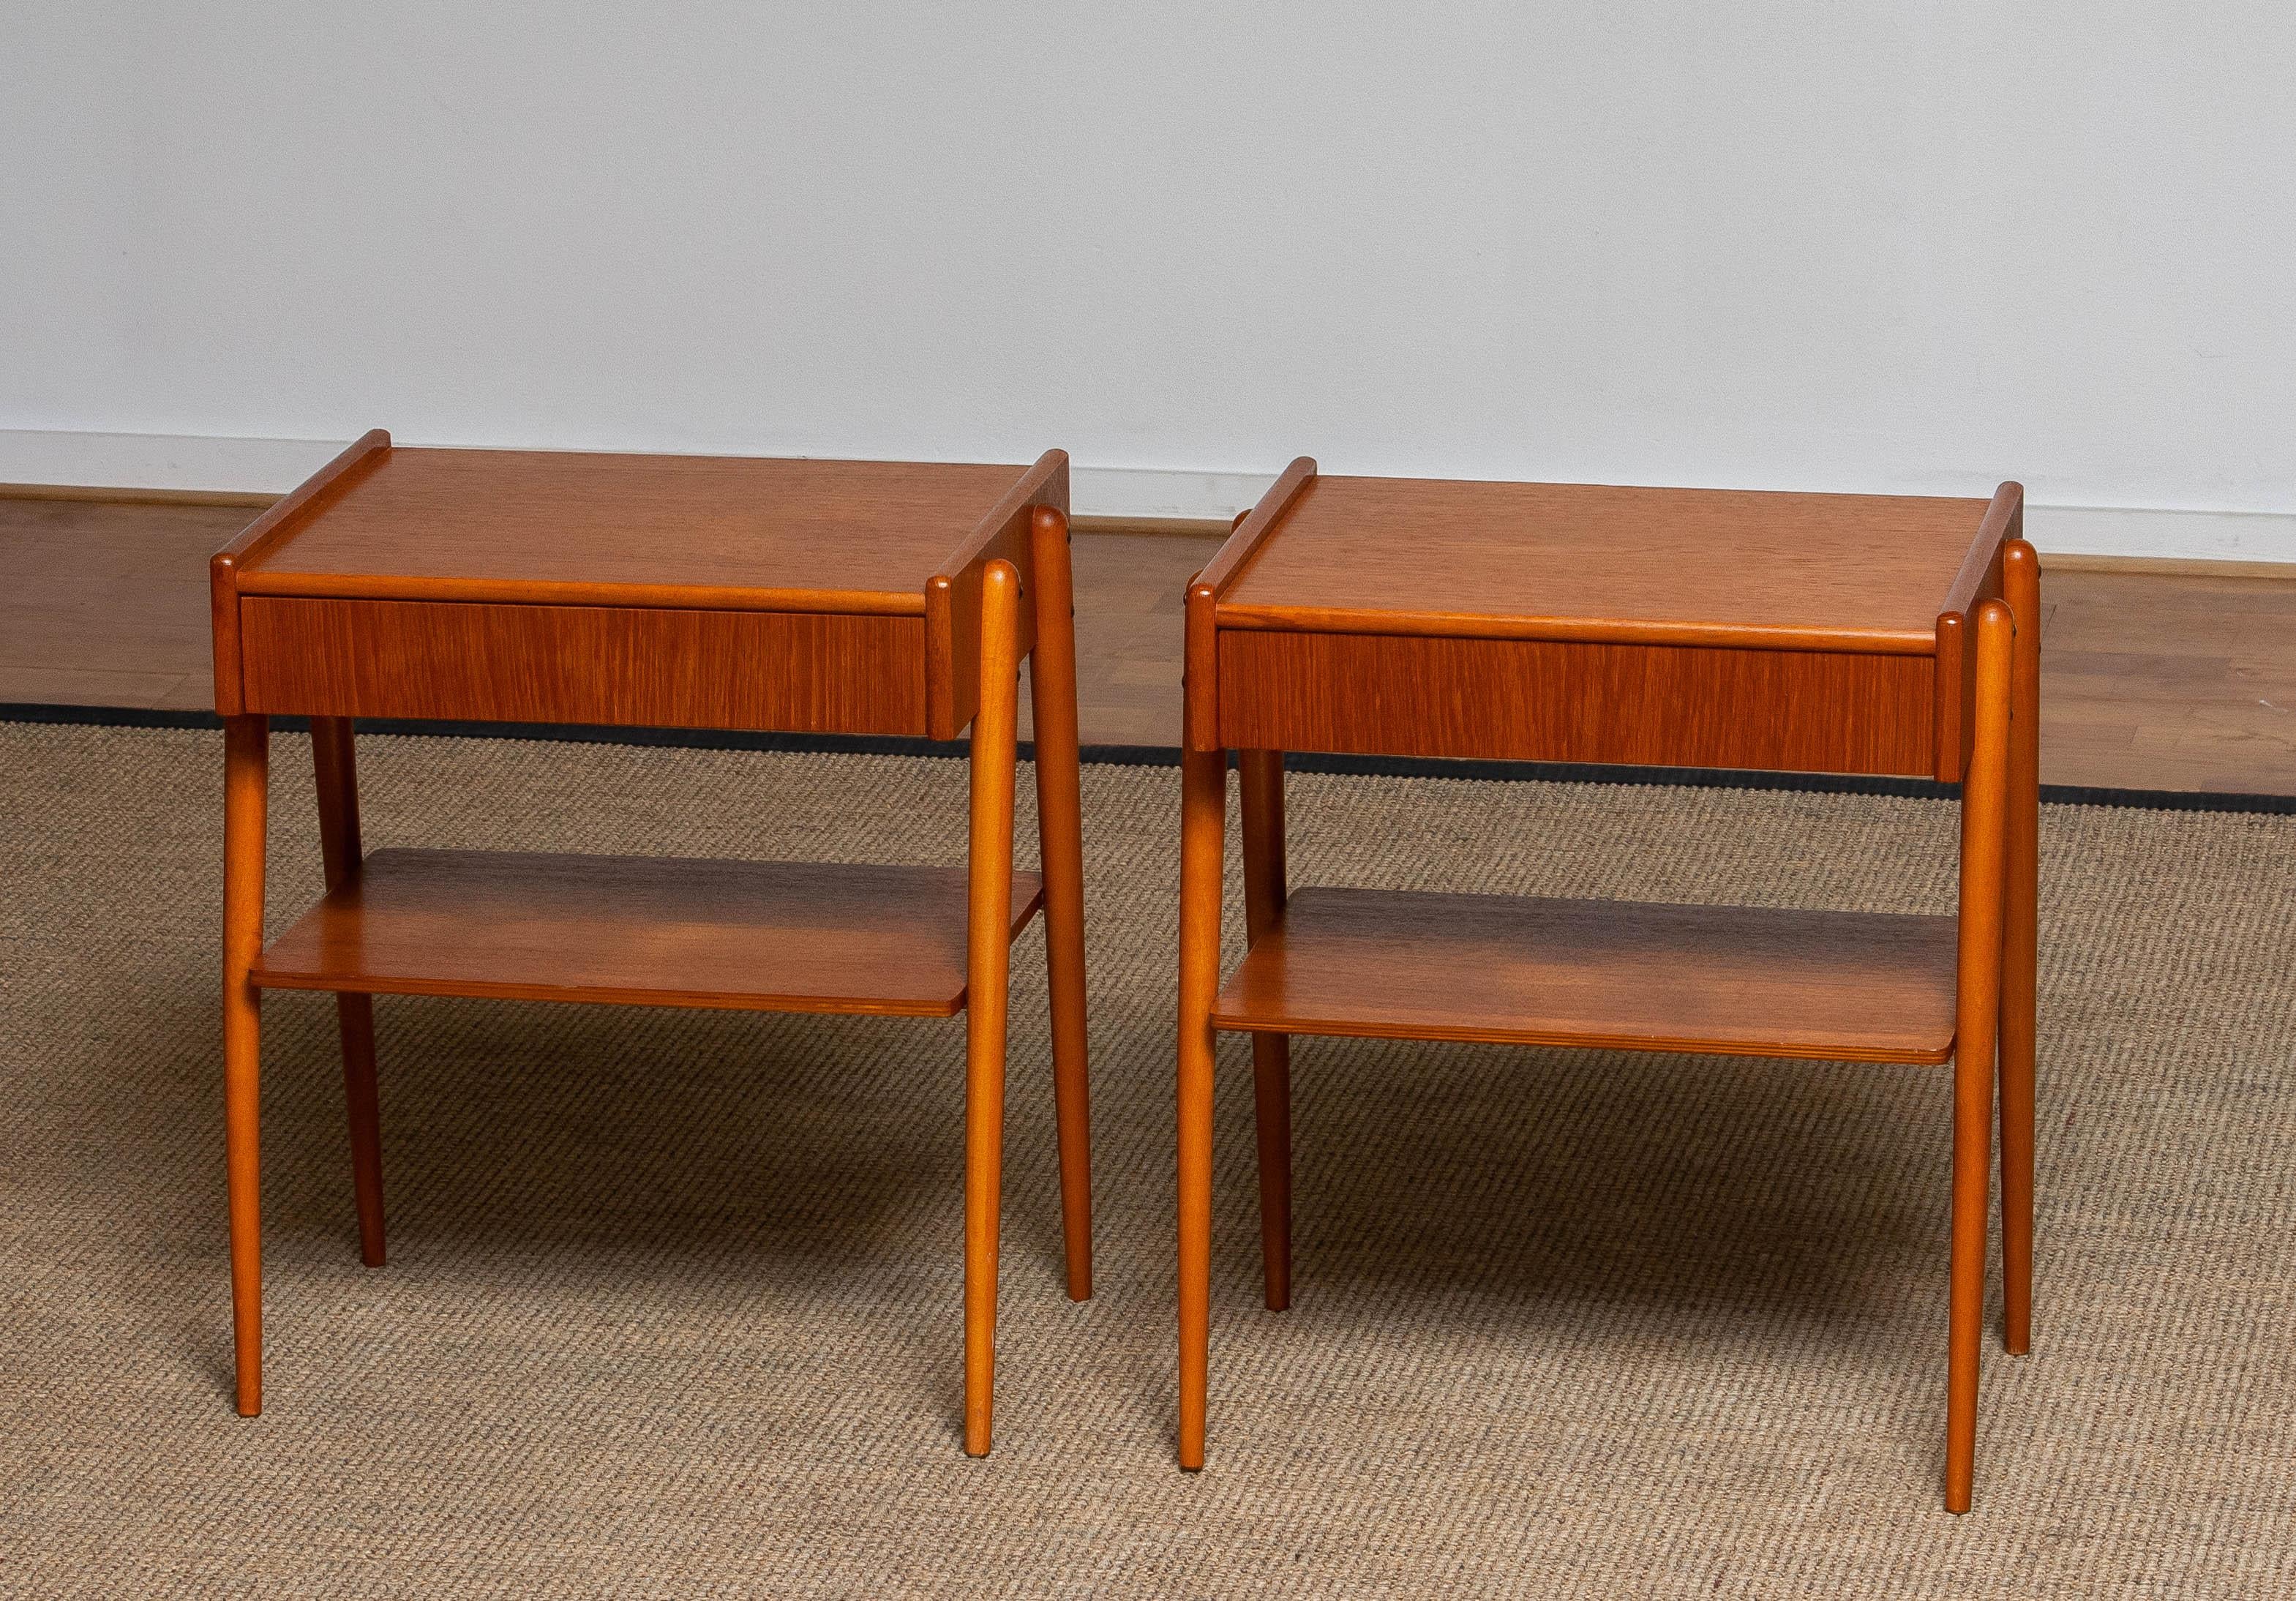 Beautiful set of two nightstands / bedside tables with drawer in teak from the 1950s and made by Carlström & Co Mobelfabrik in Sweden. 
The overall condition for both nightstands is very good.